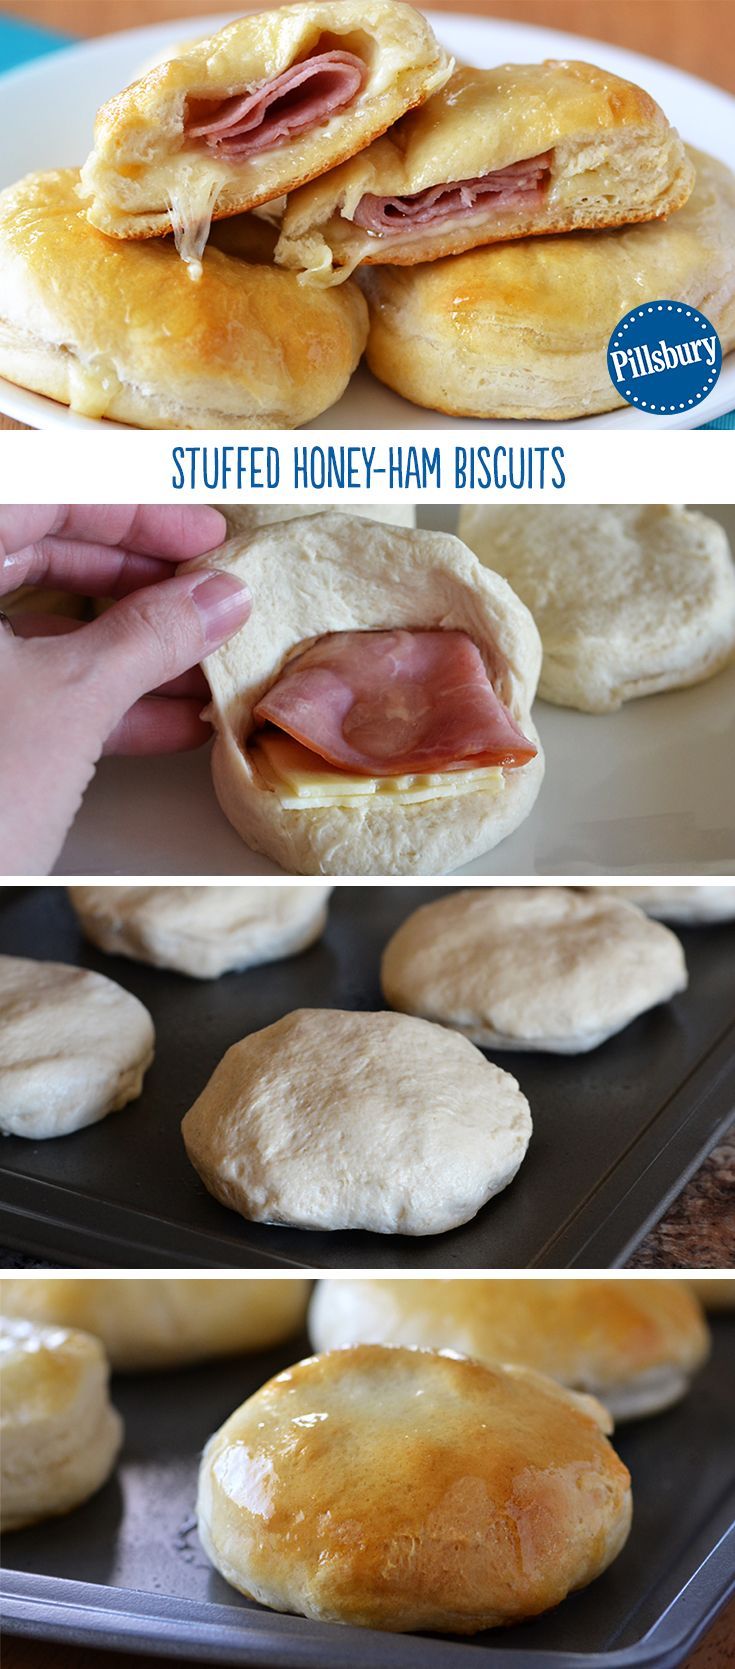 One of our top pinned recipes! These Stuffed Honey-Ham Biscuits are a simple dinner upgrade from the your